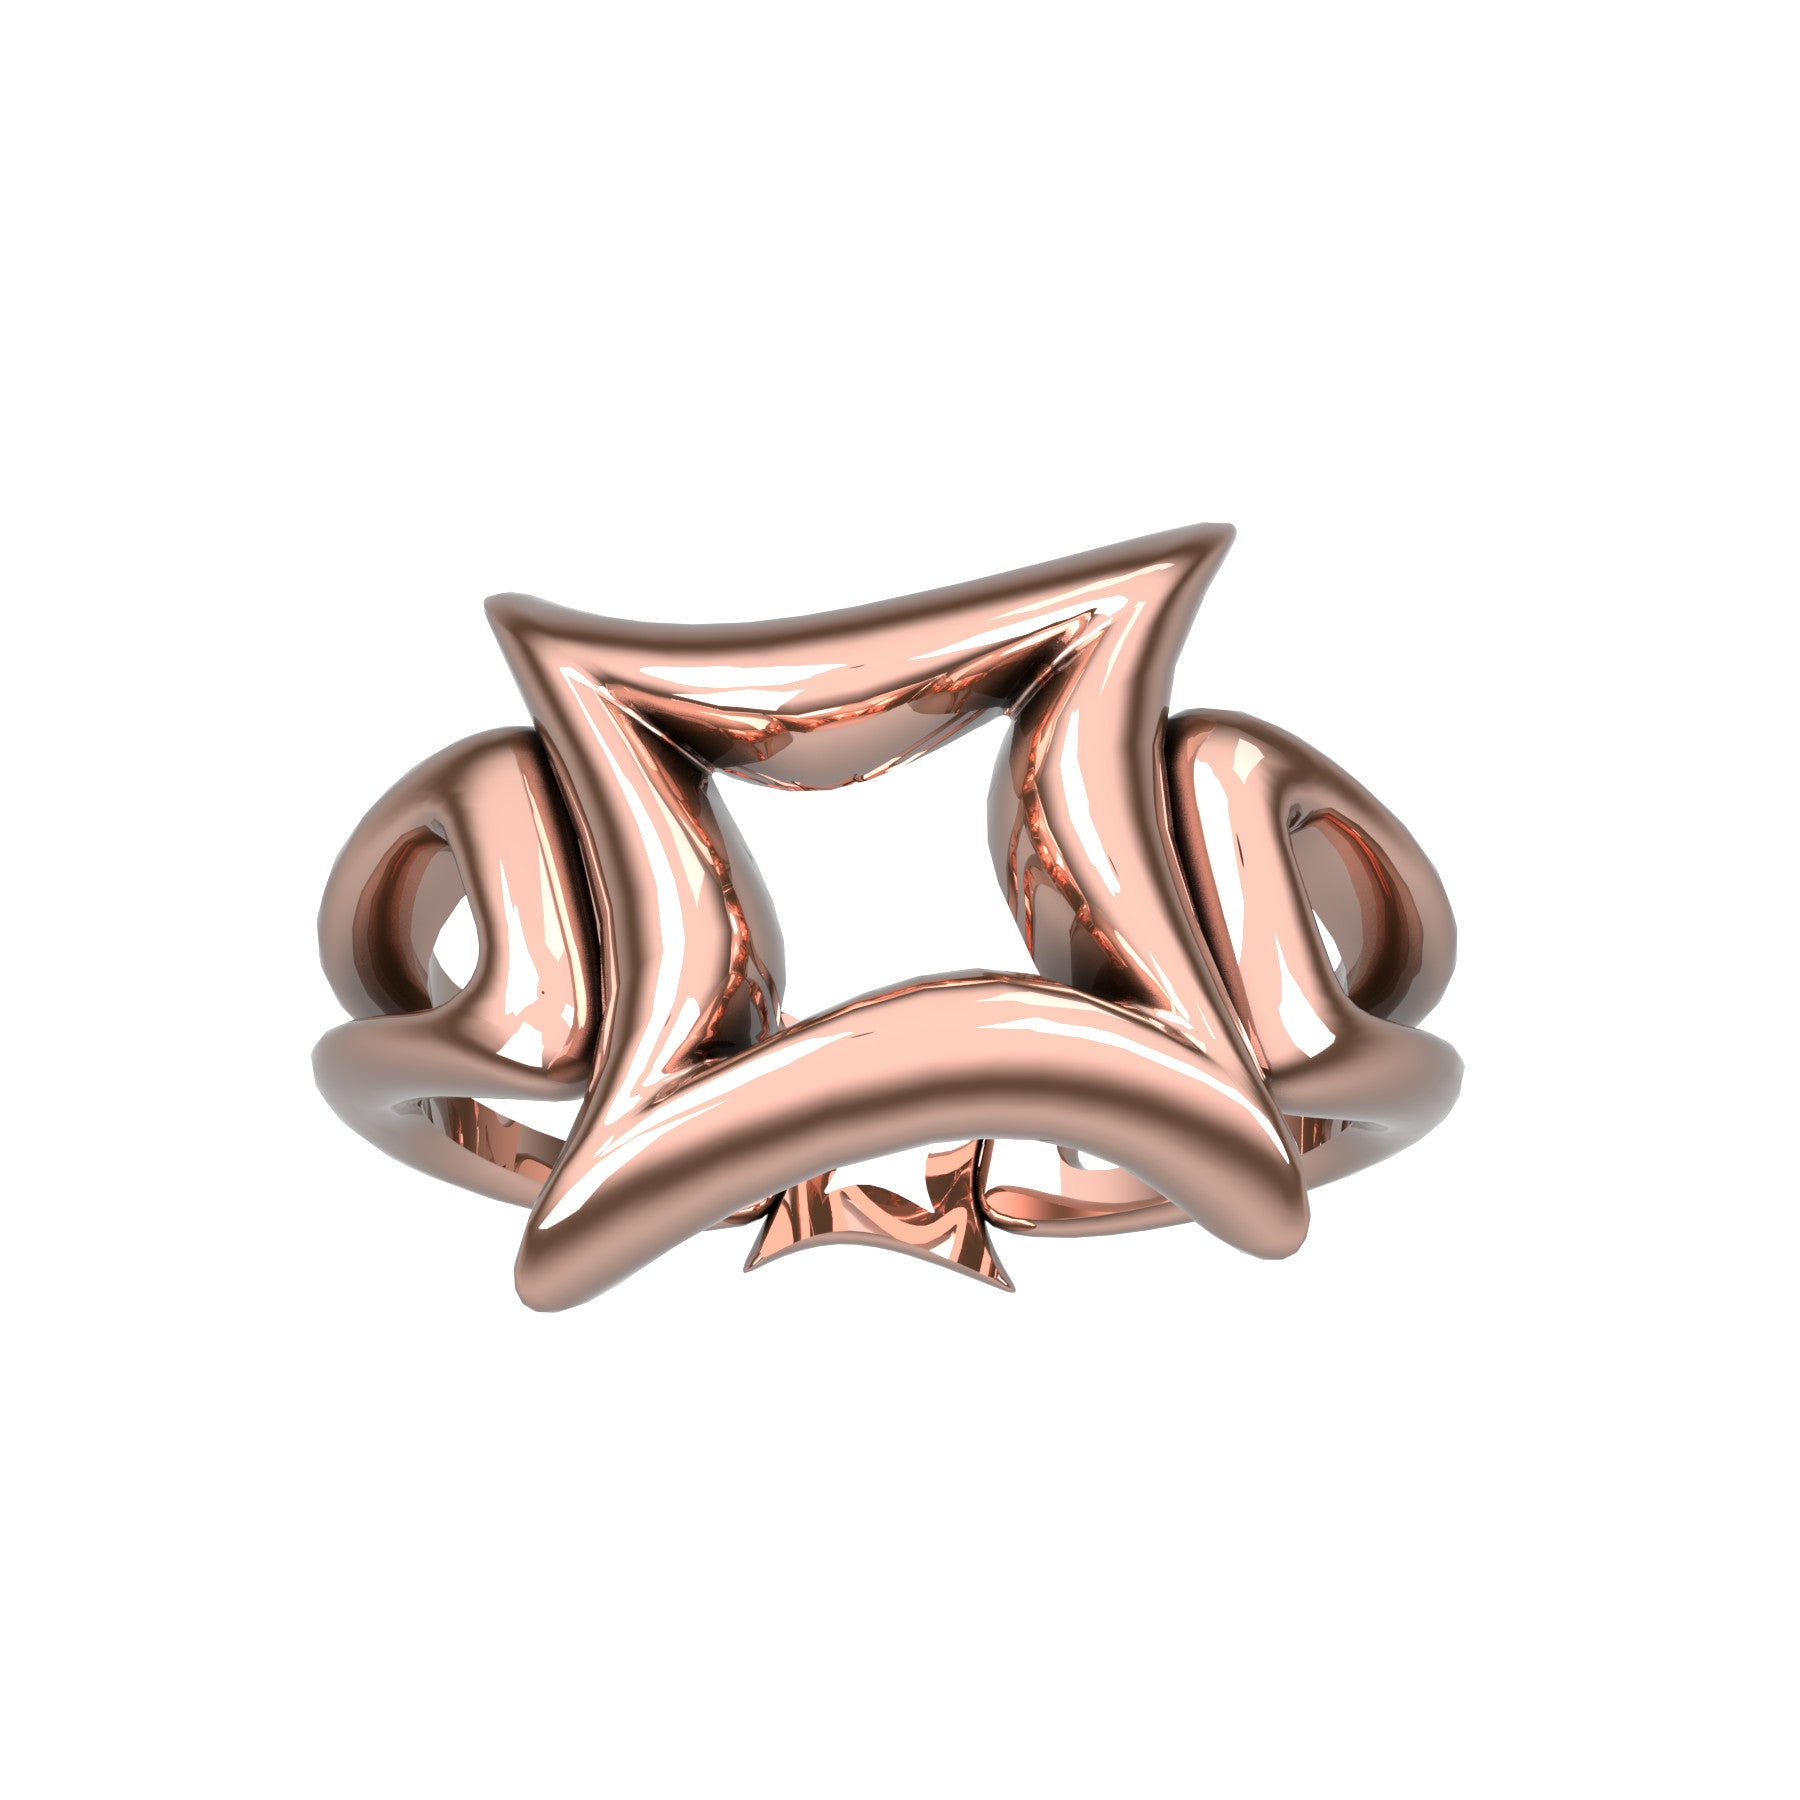 etoile bizarre ring, 18 K pink gold, weight about 5,4 g. (0.19 oz), width 13,5 mm max